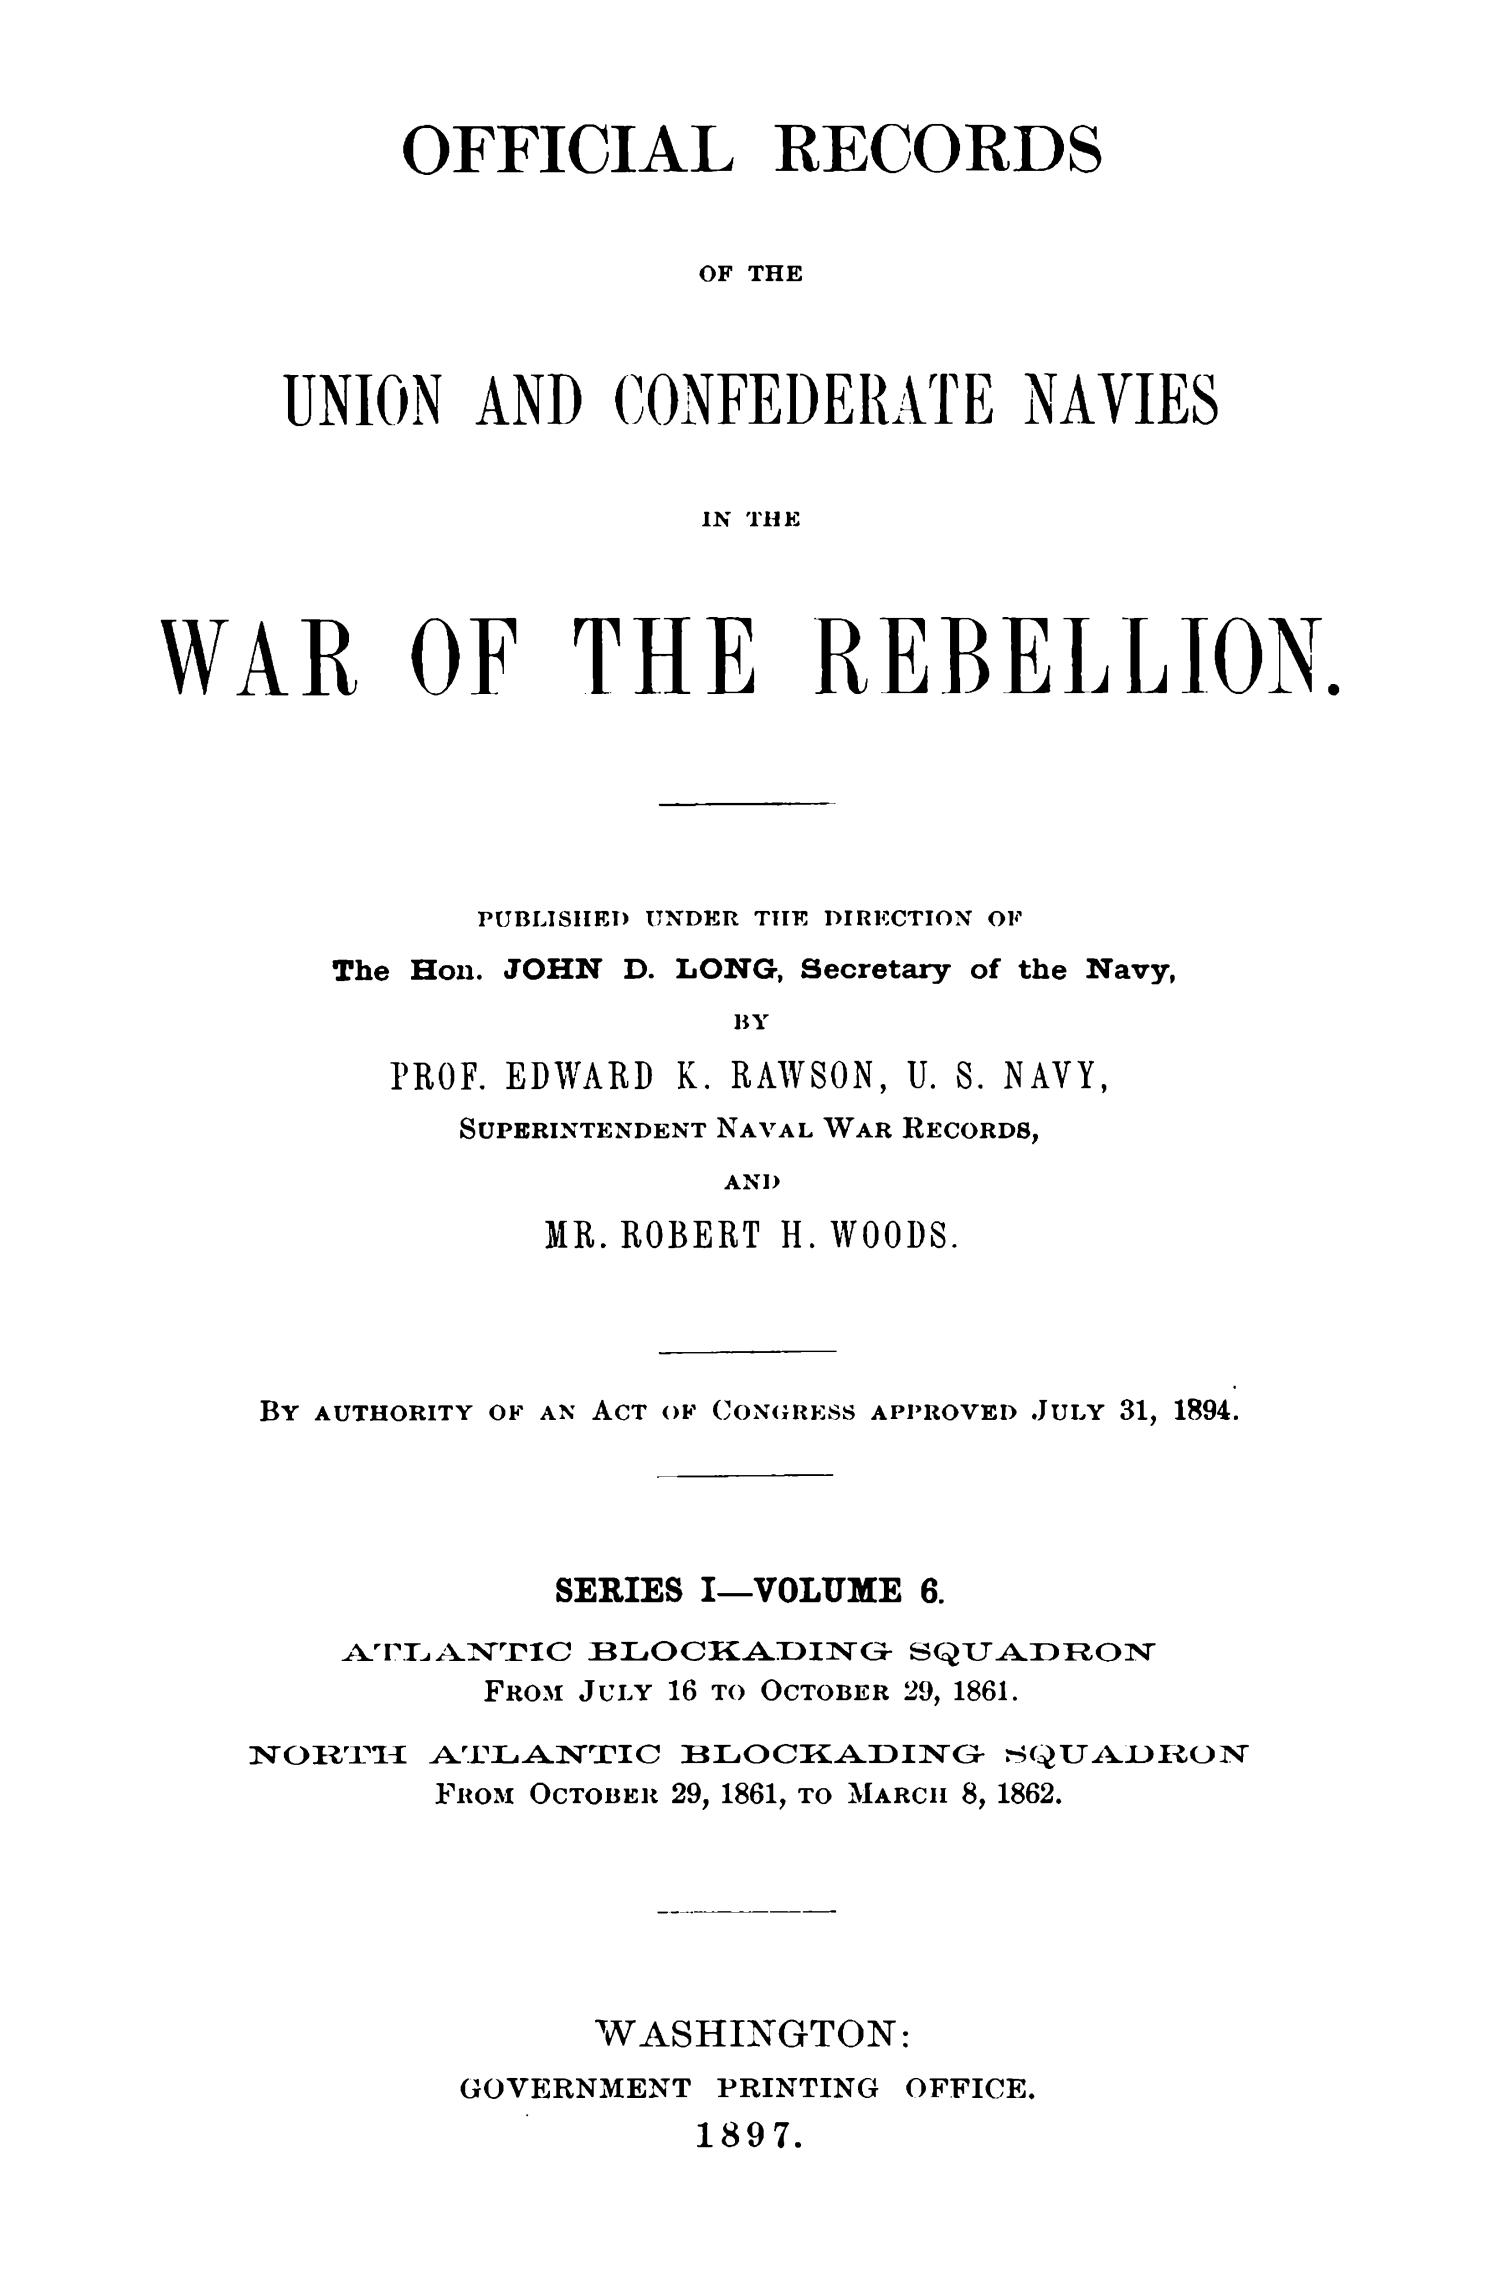 Official Records of the Union and Confederate Navies in the War of the Rebellion. Series 1, Volume 6.
                                                
                                                    I
                                                